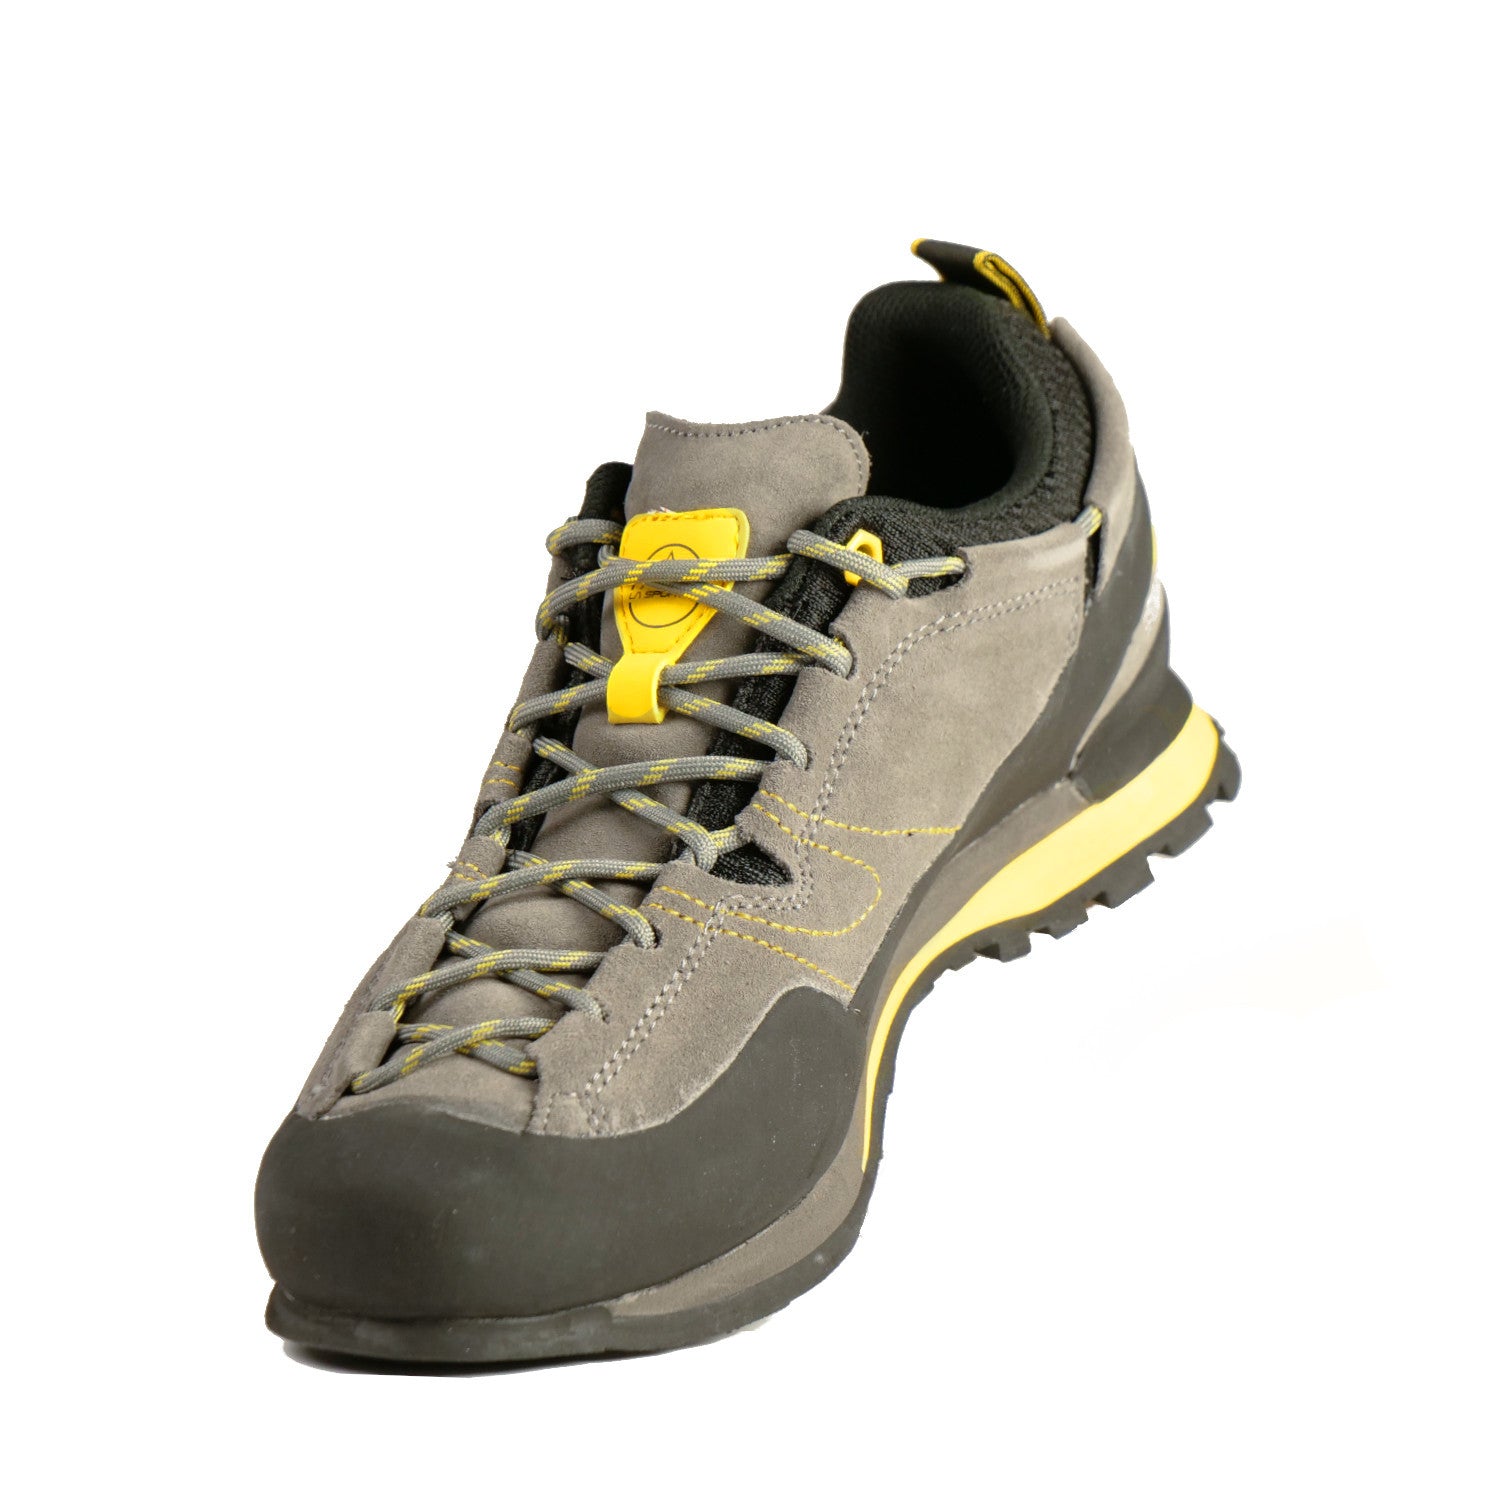 La Sportiva Boulder X approach shoe, front/side view in black, grey and yellow colours